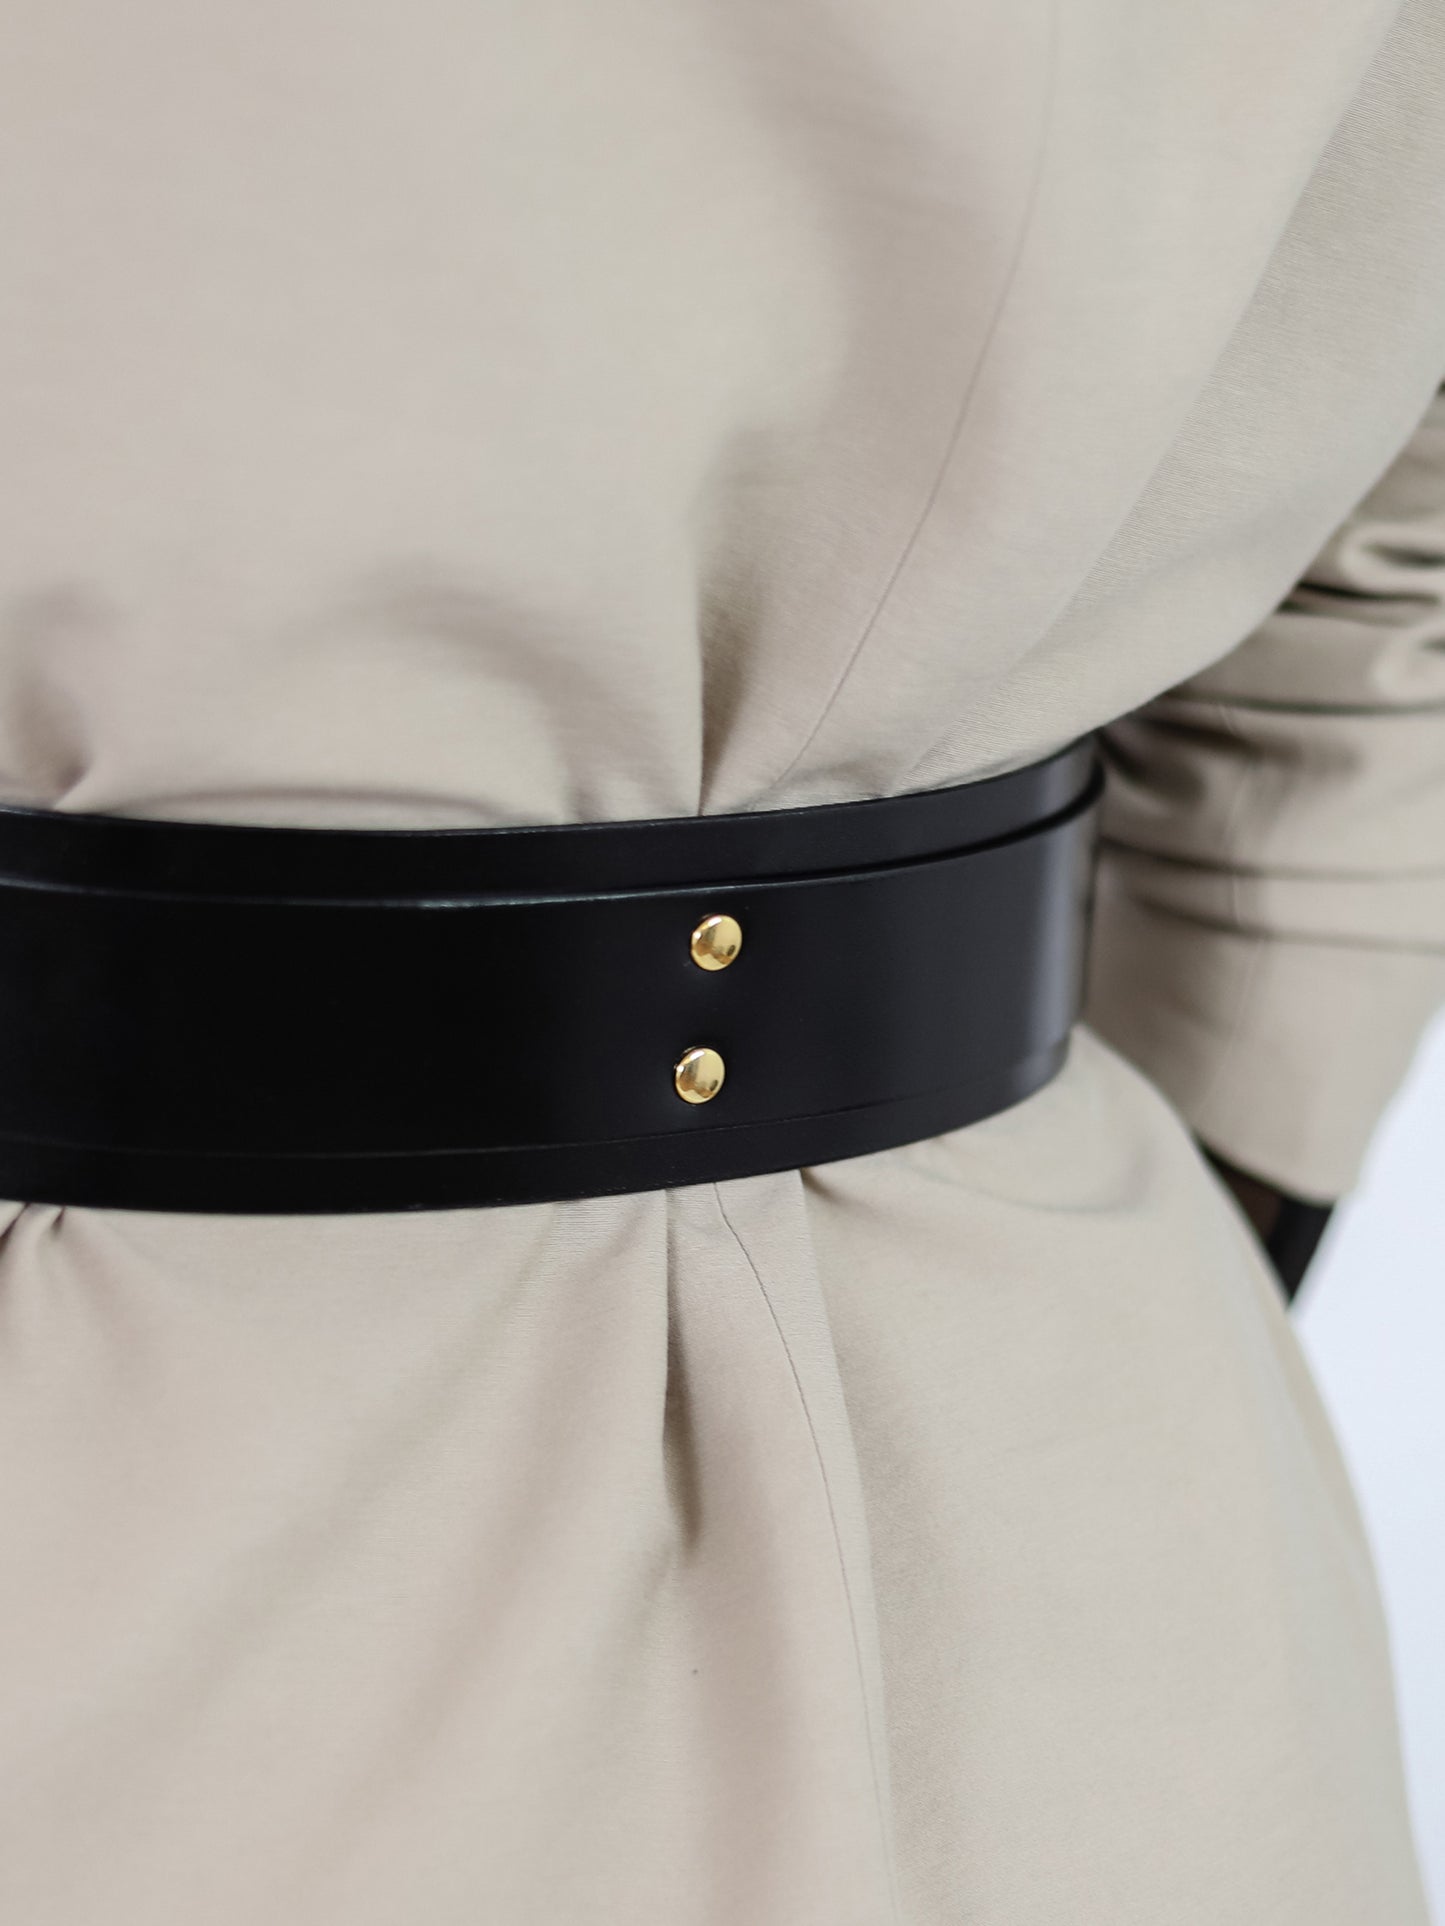 Back detailed view of black leather belt for women.